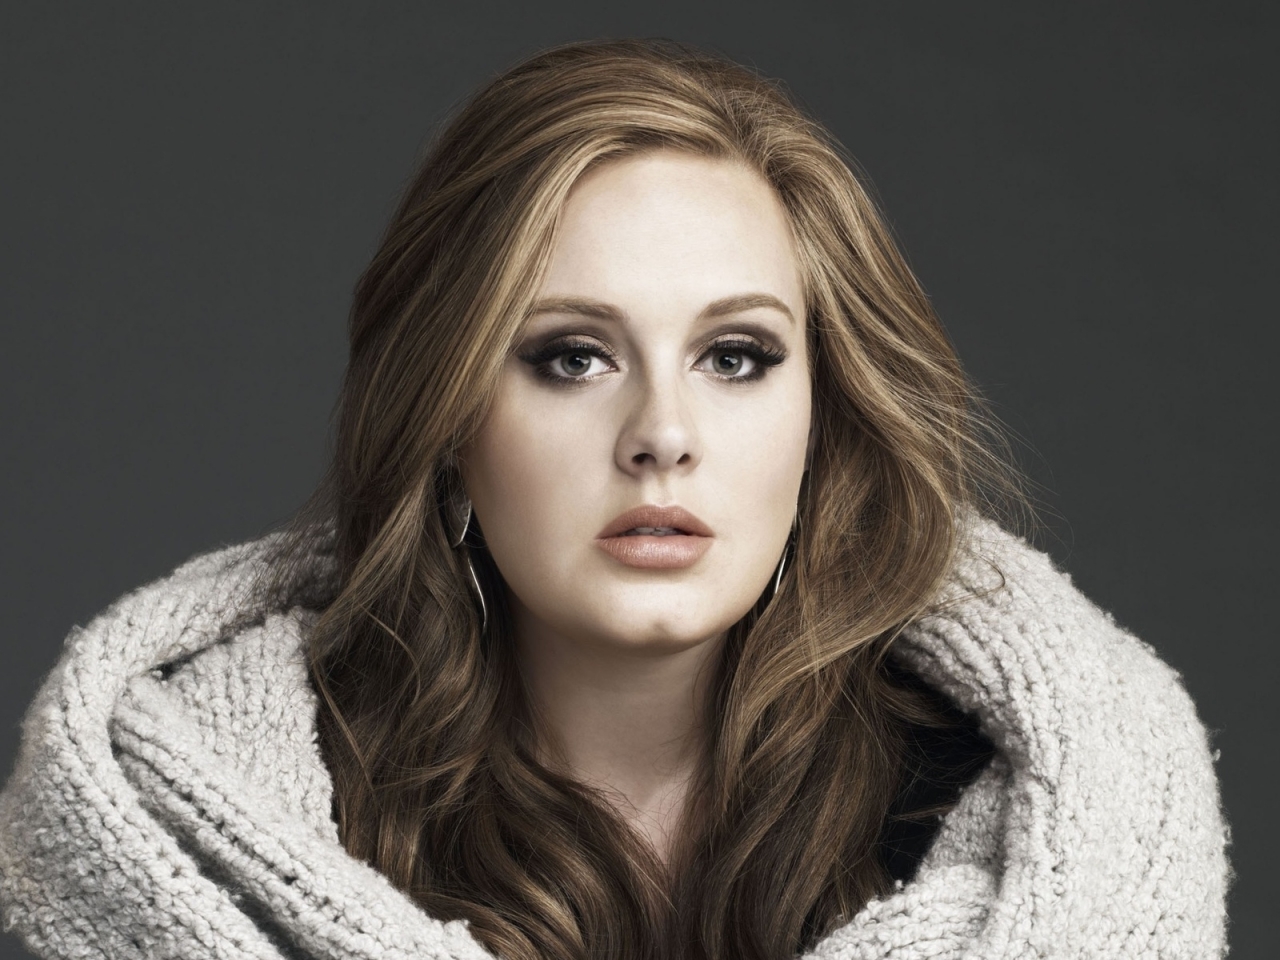 Adele Serious Look for 1280 x 960 resolution